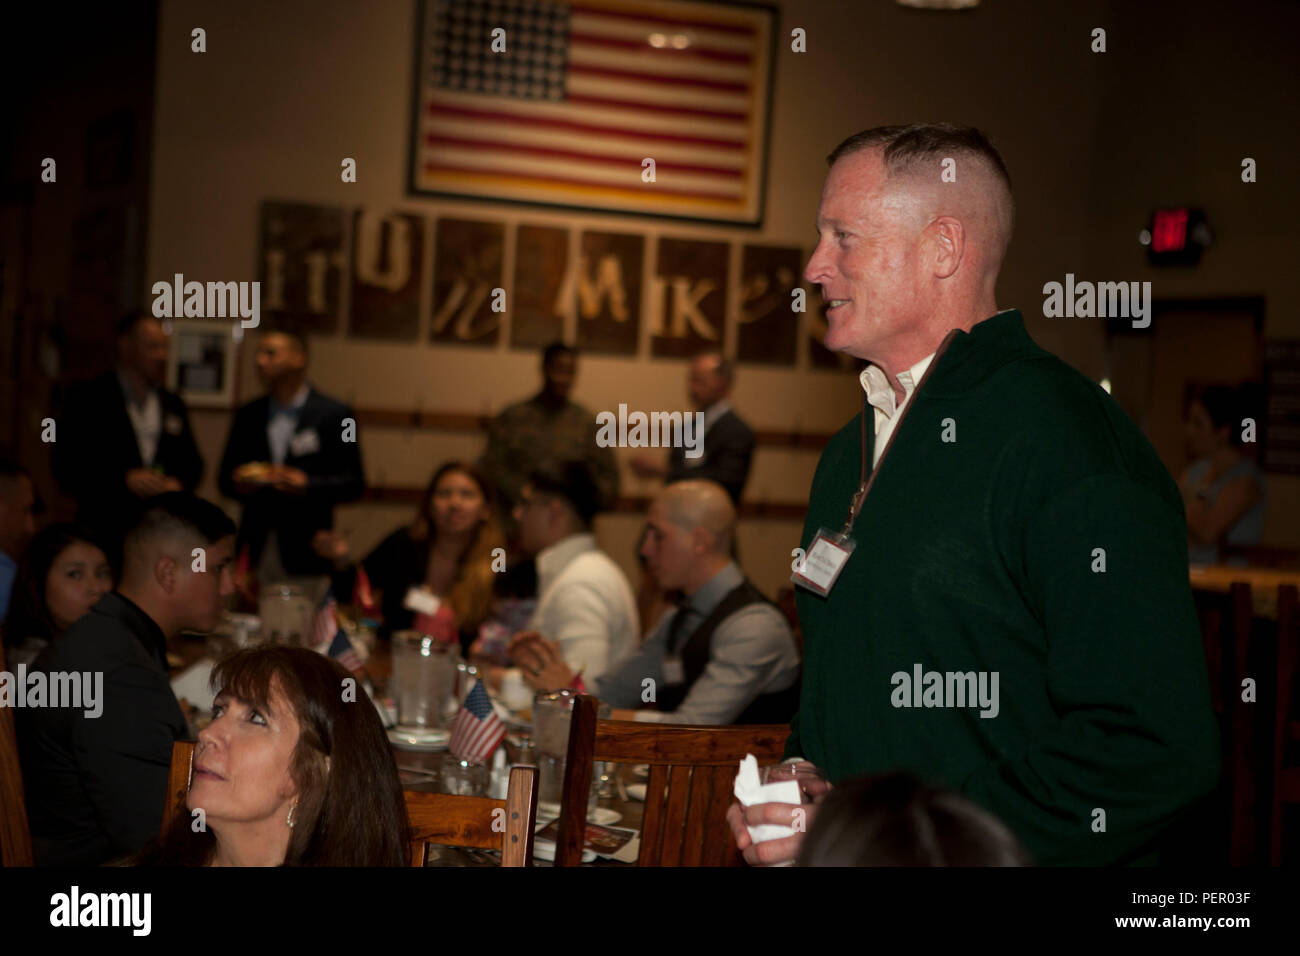 U.S. Marine Corps Brig. Gen. Edward Banta, Camp Pendleton and MCIWEST Commanding General speaks with honored guests prior to the start of the Food Industry Feeding Heroes (FISH) dinner, at Iron Mikes lounge on Camp Pendleton Calif., Jan. 21, 2016. The event is hosted by Camp Pendleton and MCIWEST Commanding General, Brig. Gen. Edward Banta, and Mr. Paul Chapa to honor service members for their accomplishments and sacrifices. (U.S. Marine Corps photo by Cpl. Brian Bekkala/MCIWEST-MCB CamPen Combat Camera/Released) Stock Photo